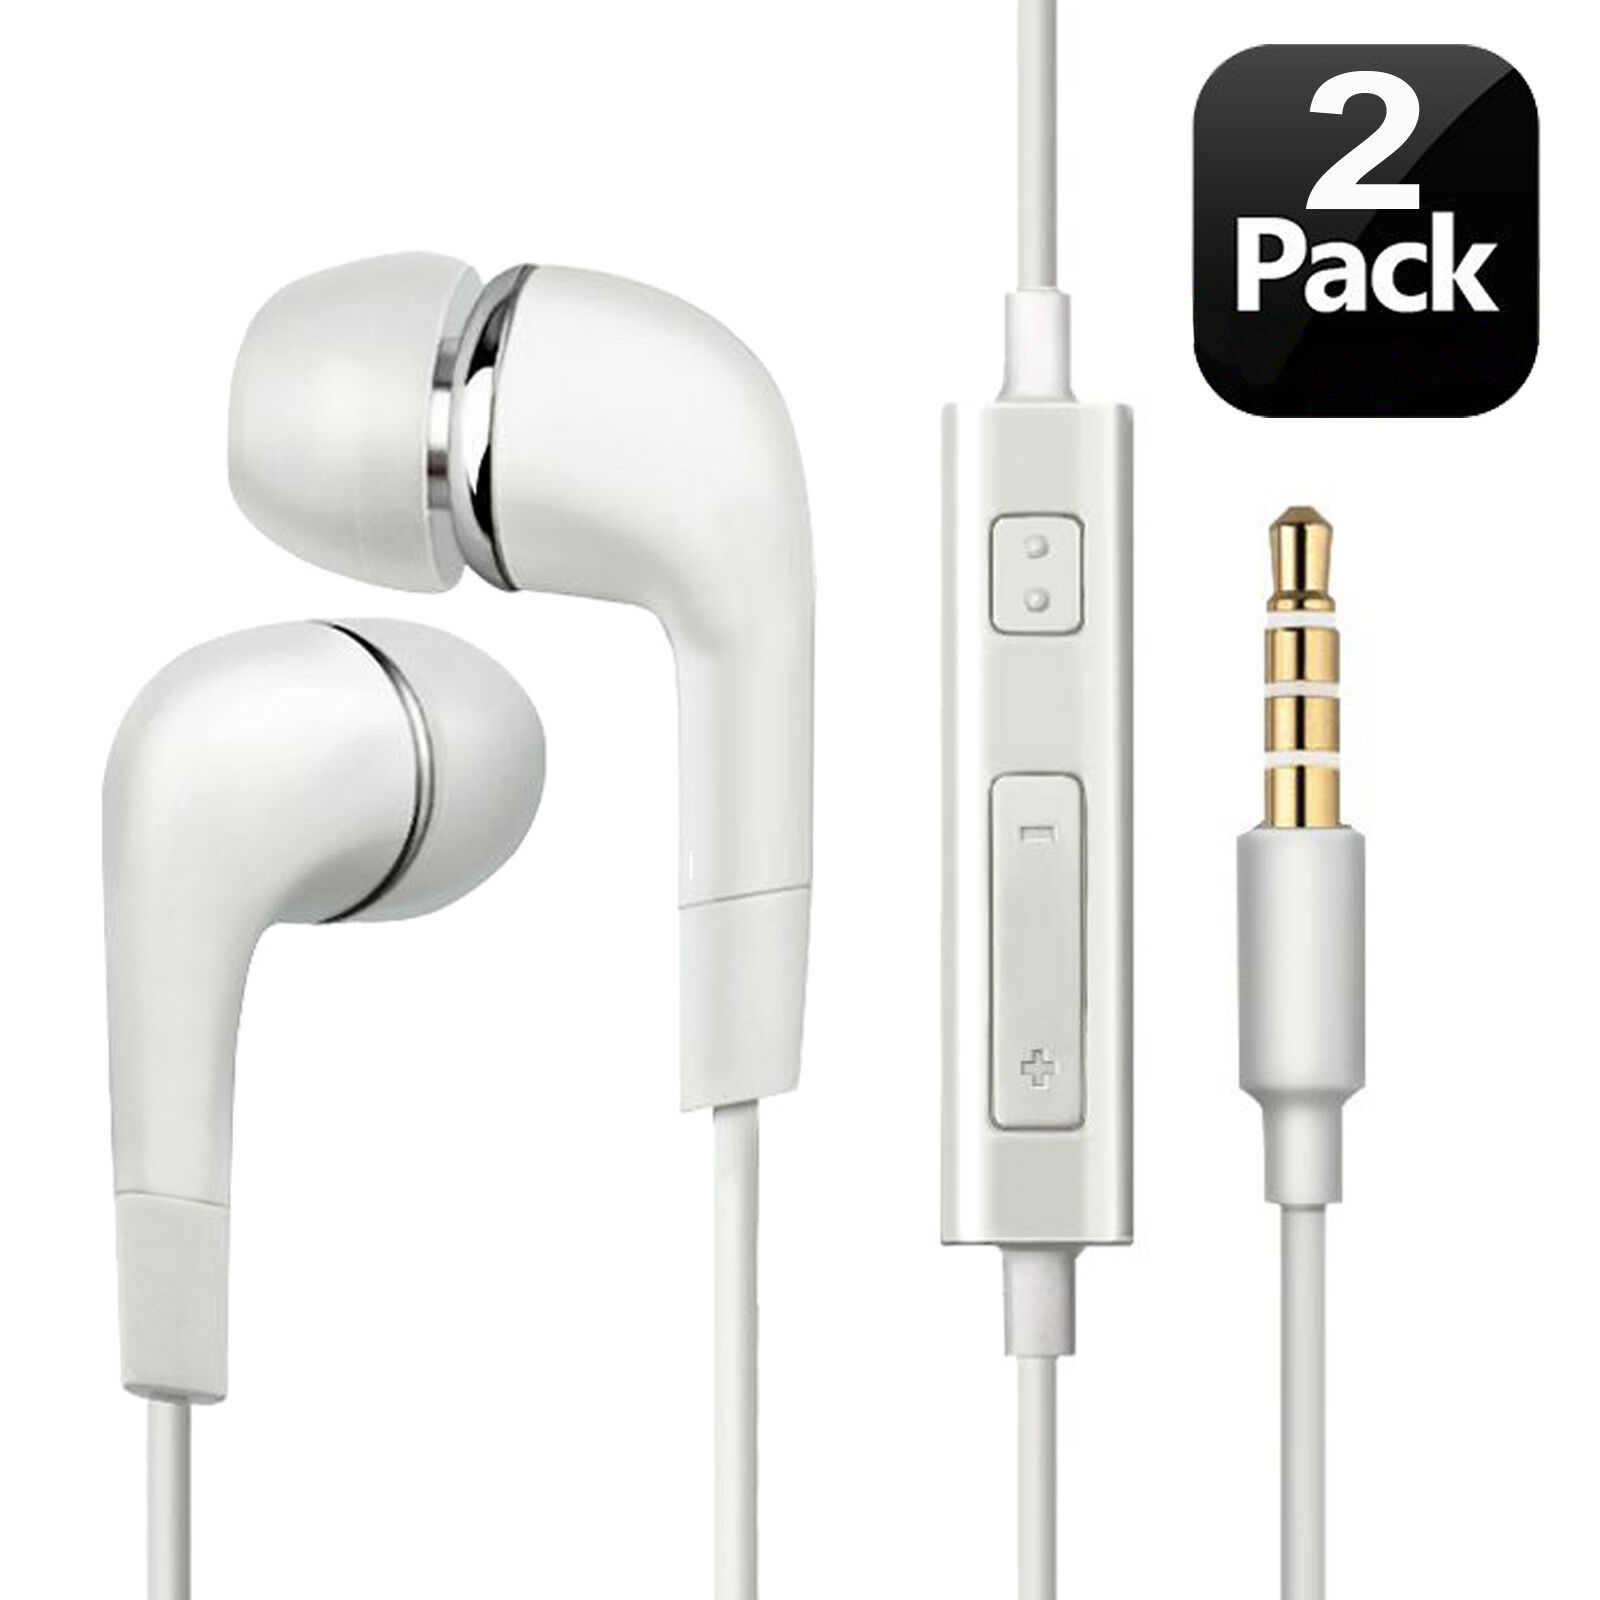 2pcs For Samsung Handsfree Wired Headphones Earphones Earbud with Mic-White